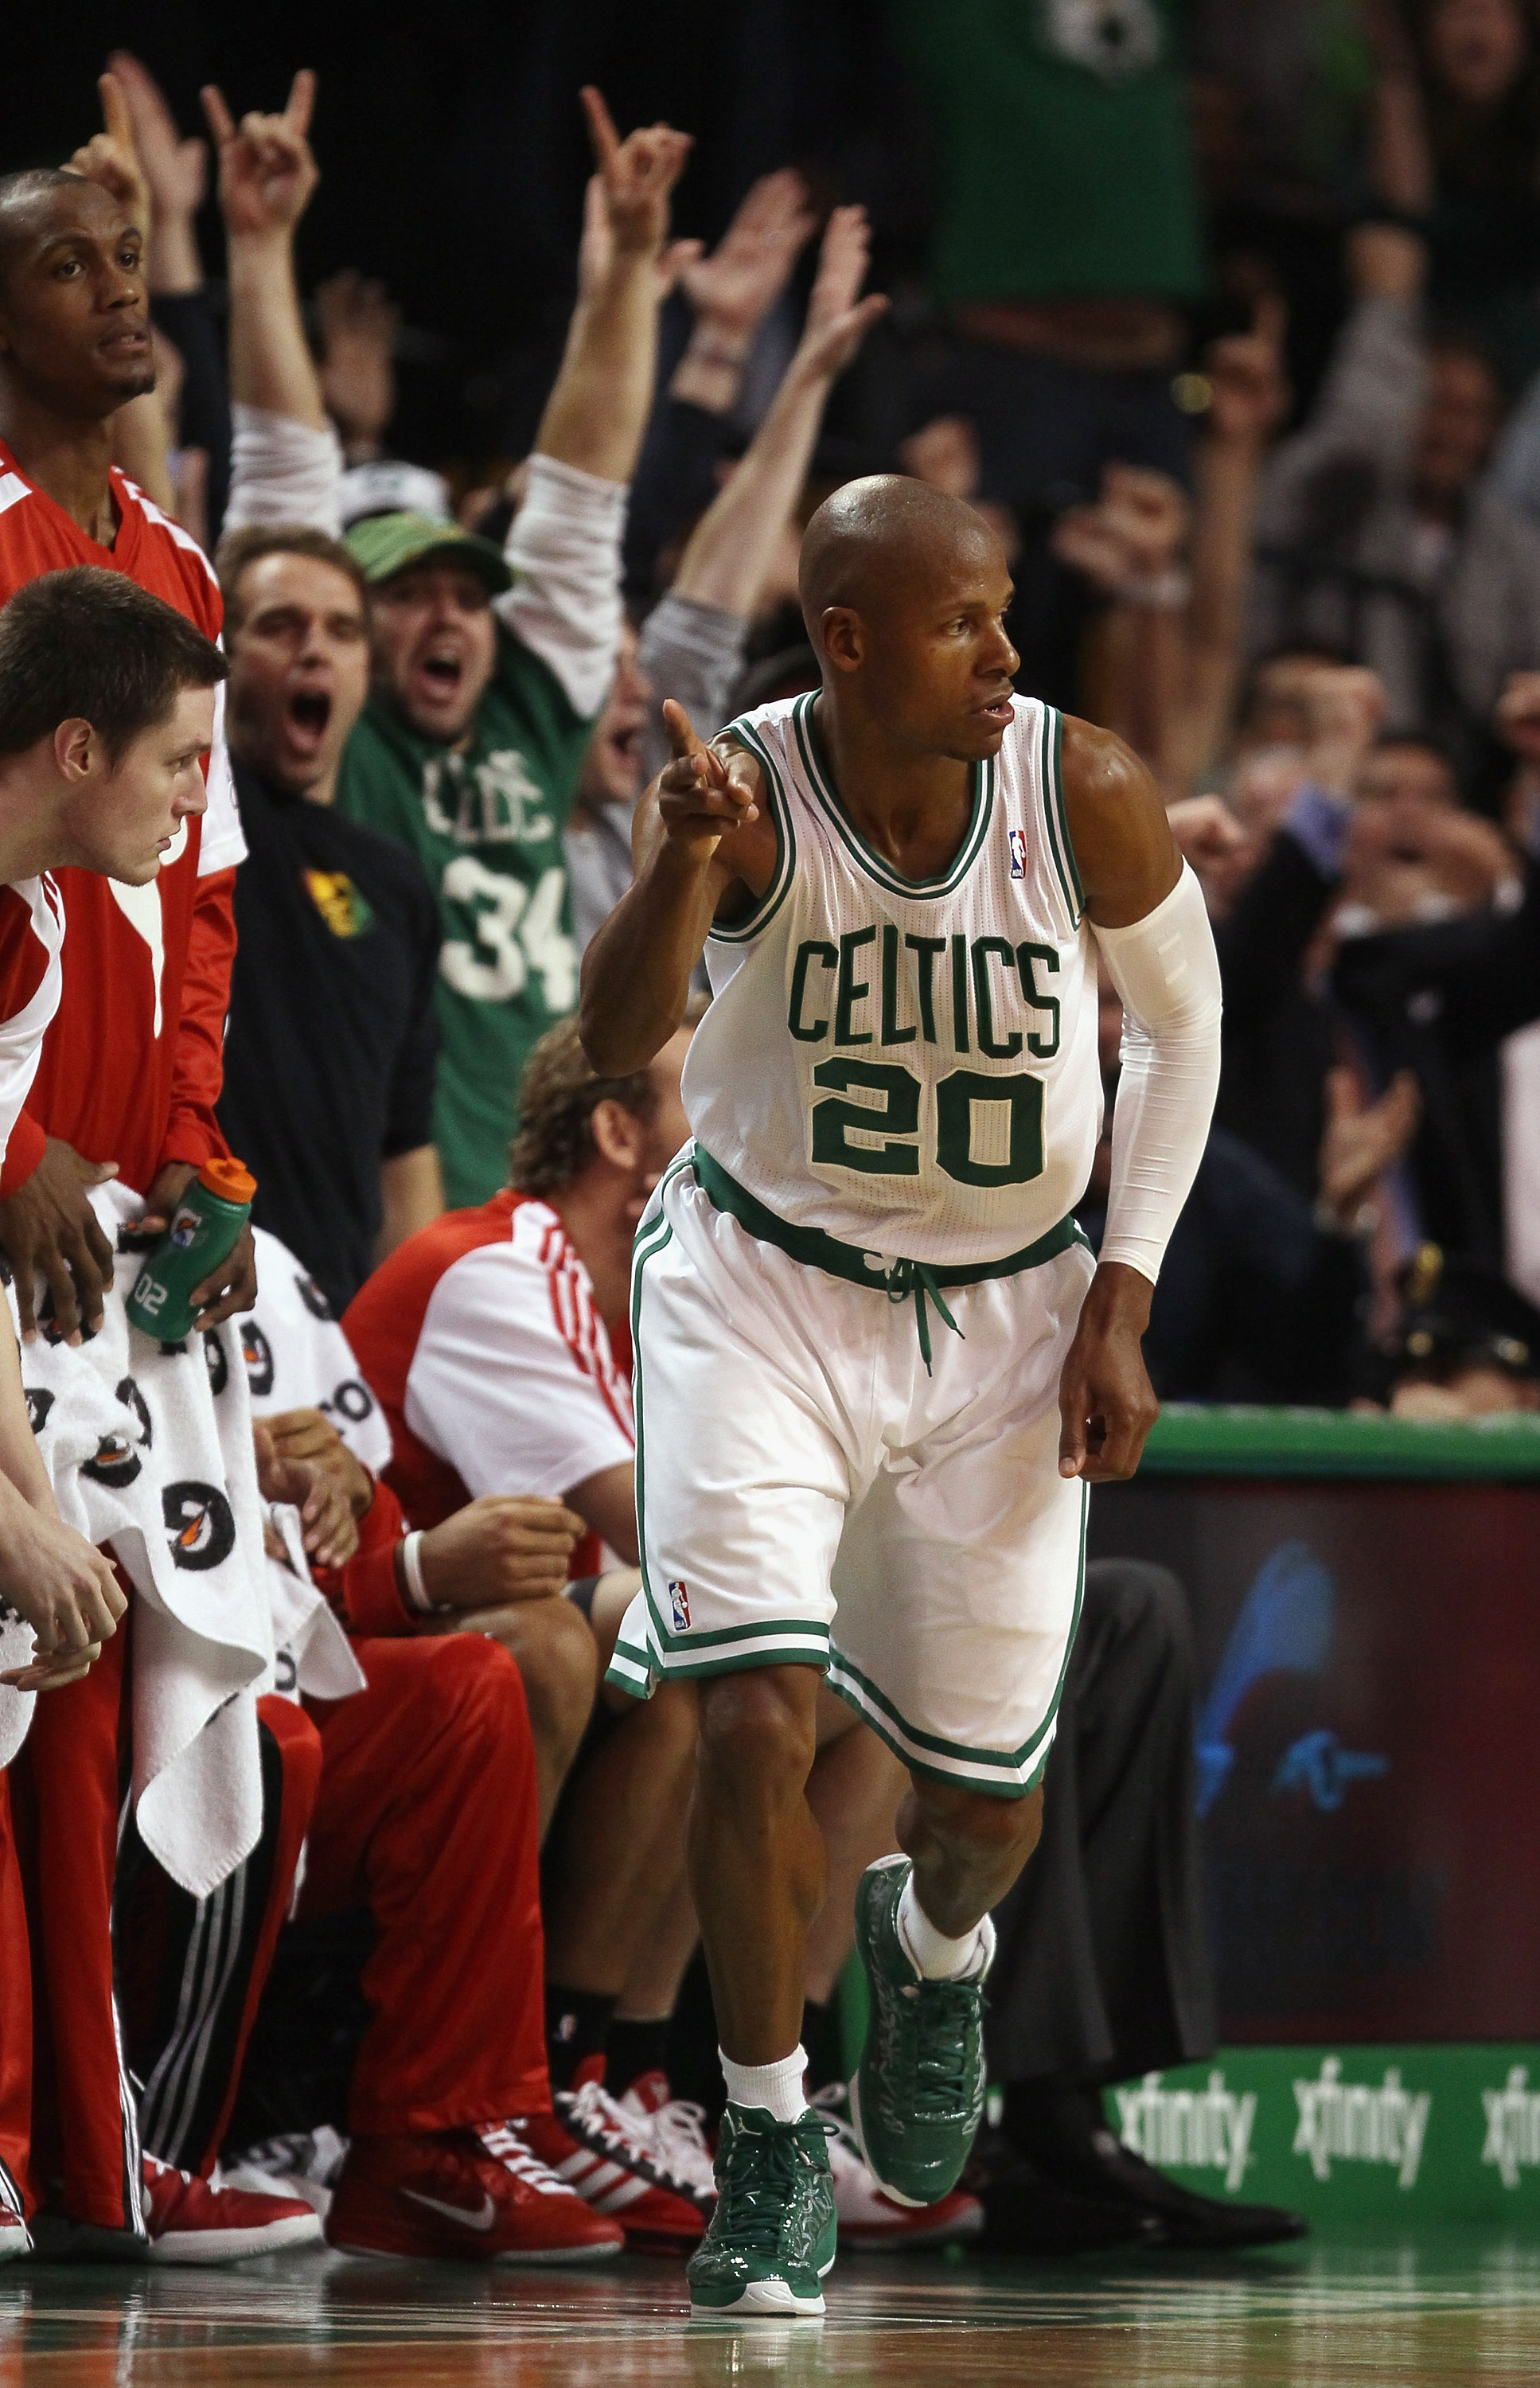 BOSTON - DECEMBER 01:  Ray Allen #20 of the Boston Celtics celebrates his three point shot in the final seconds of the game the Portland Trailblazers on December 1, 2010 at the TD Garden in Boston, Massachusetts. The Celtics defeated the Trailblazers 99-9